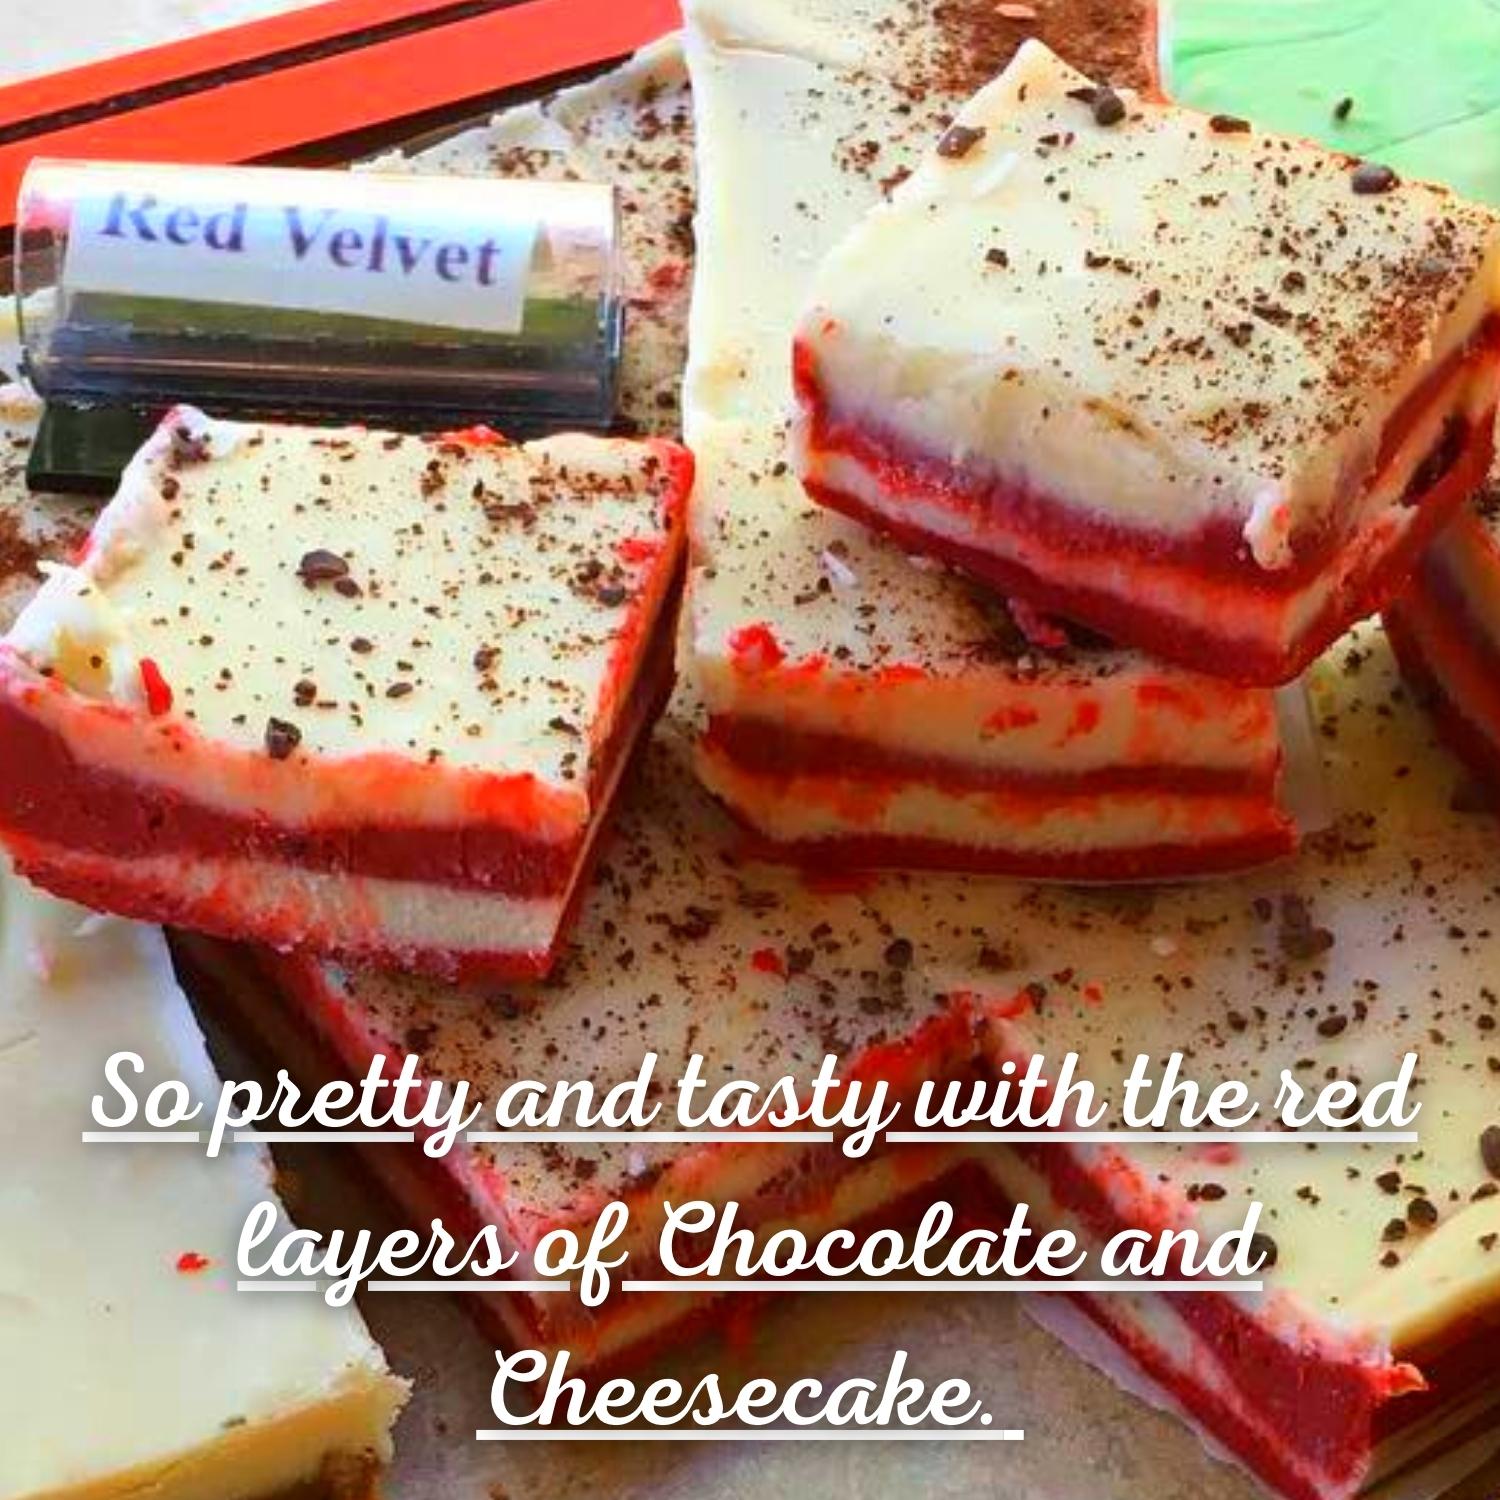 Red Velvet Fudge So pretty and tasty with the red layers of Chocolate and Cheesecake. Seasonal